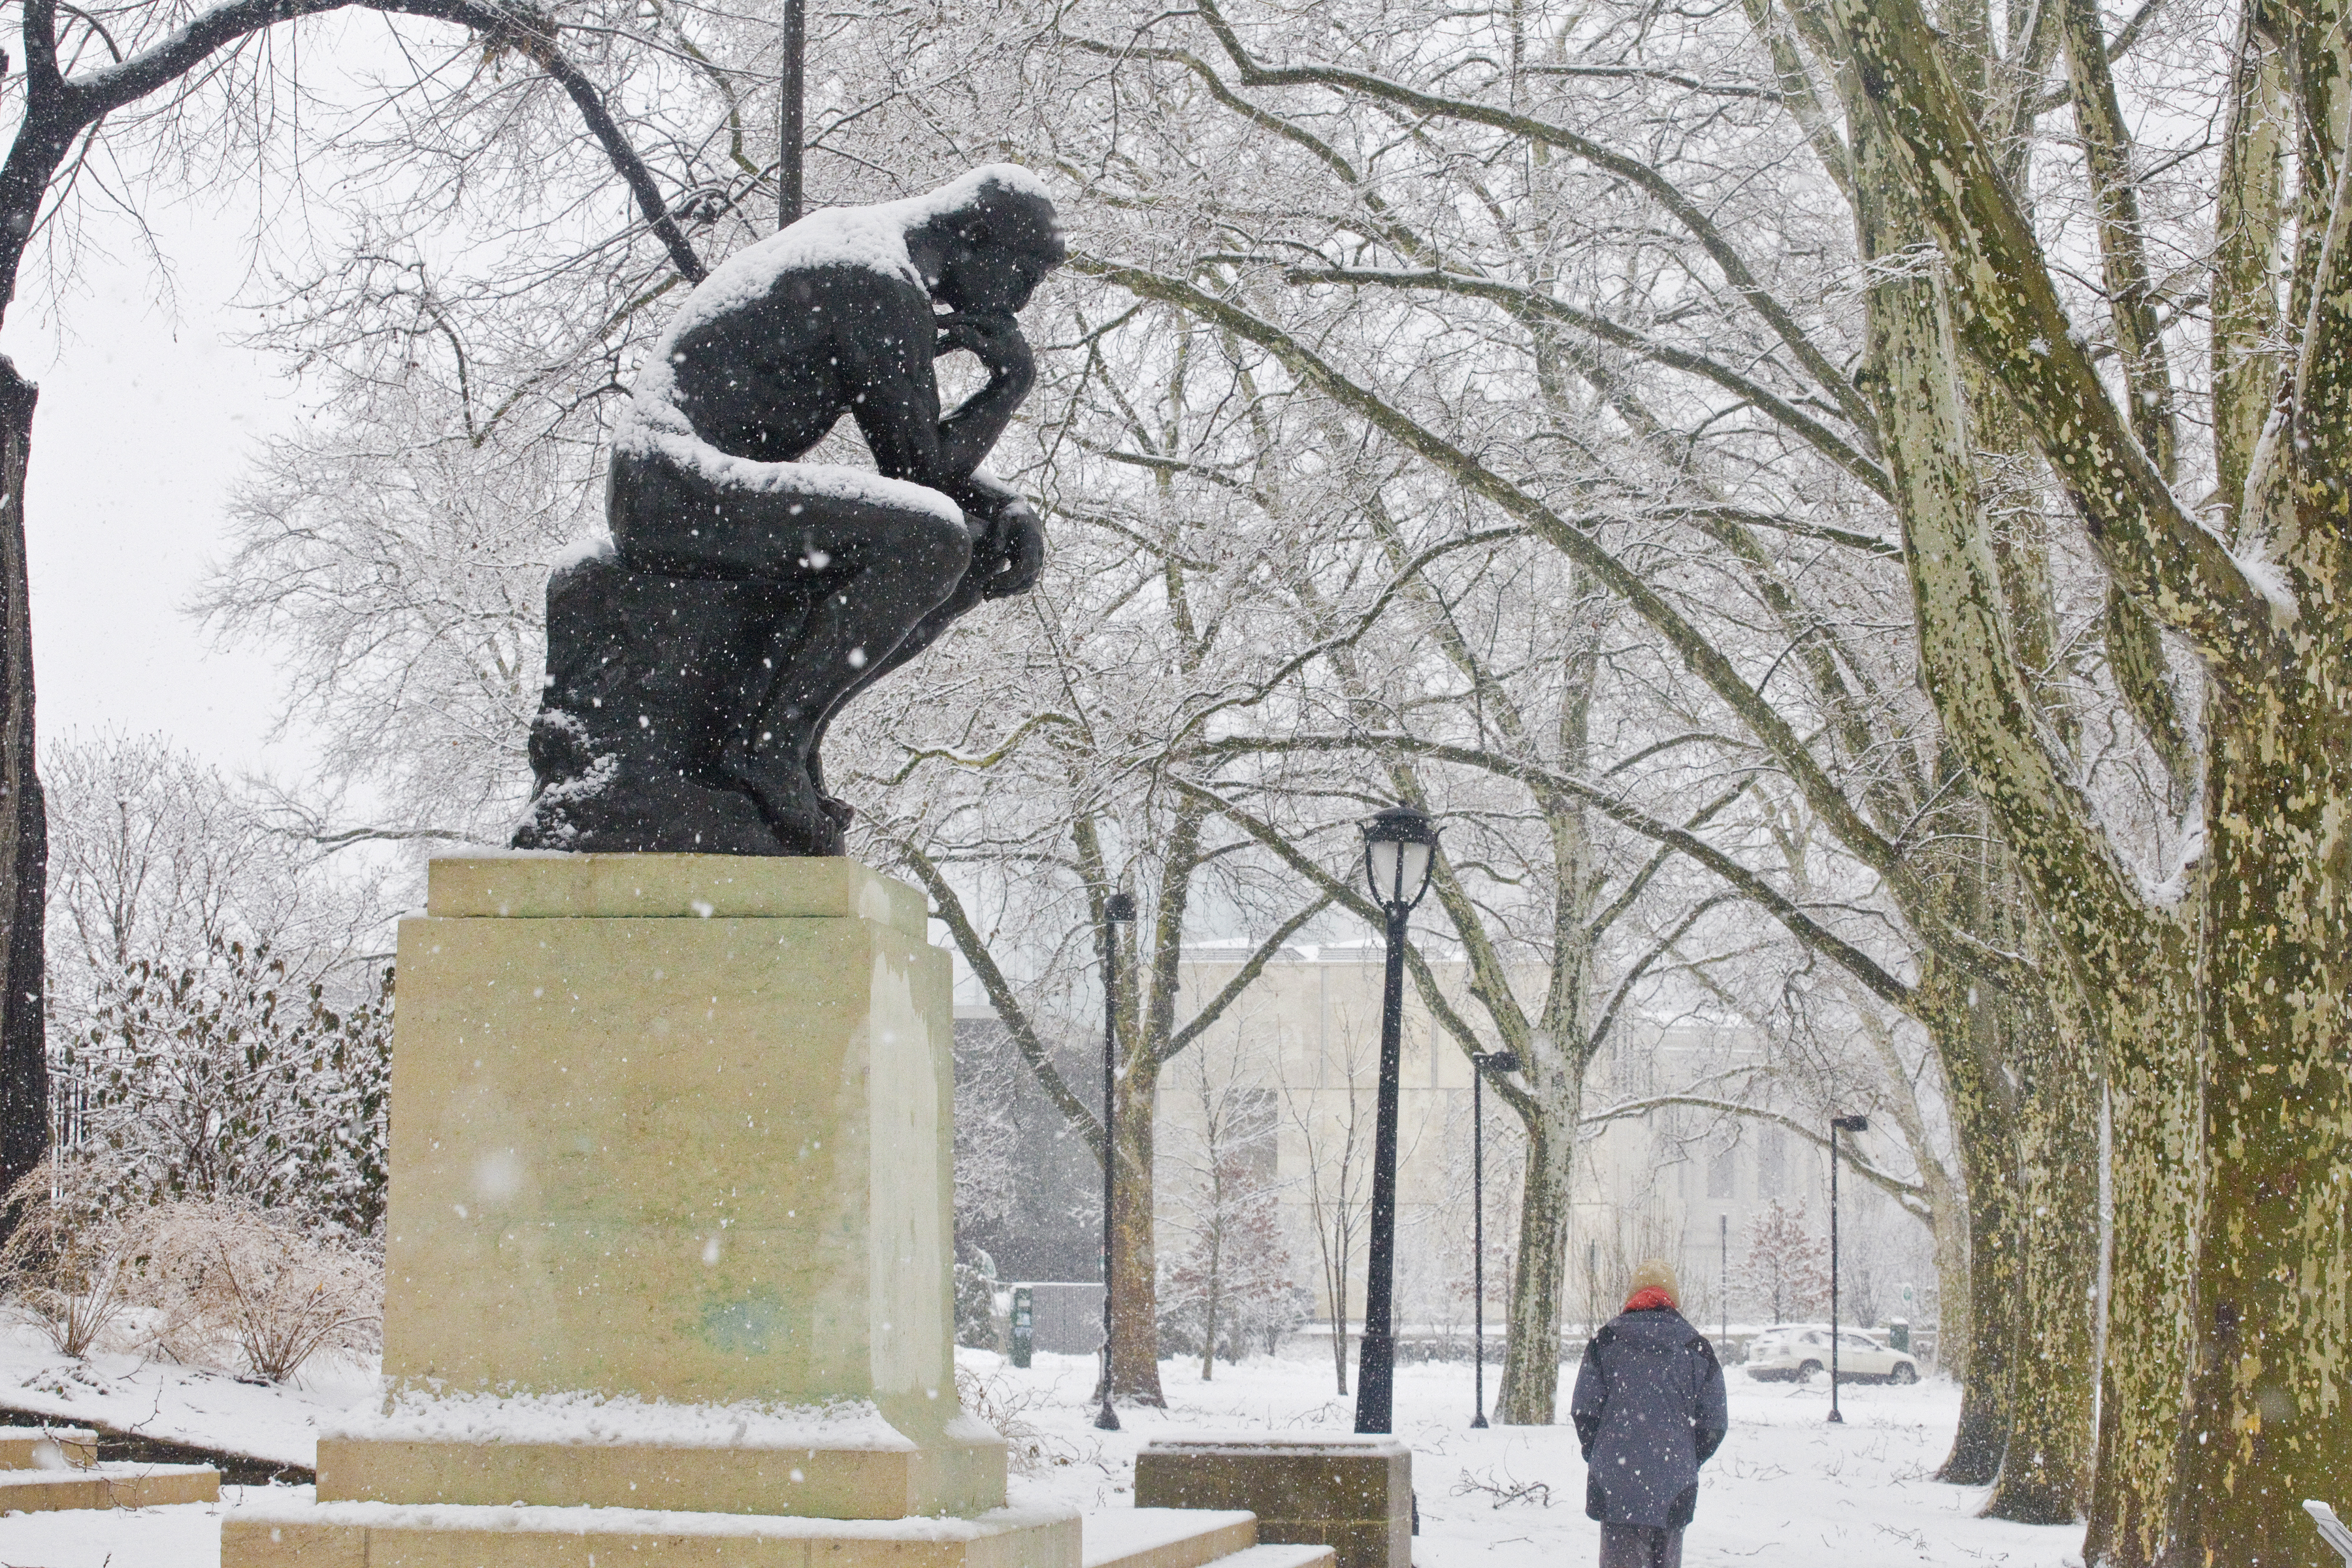 The Thinker looks even more pensive with a dusting of snow. Situated along Philadelphia�s culture-packed Benjamin Franklin Parkway, the Rodin Museum houses the largest collection of the works of Auguste Rodin outside of his native France.